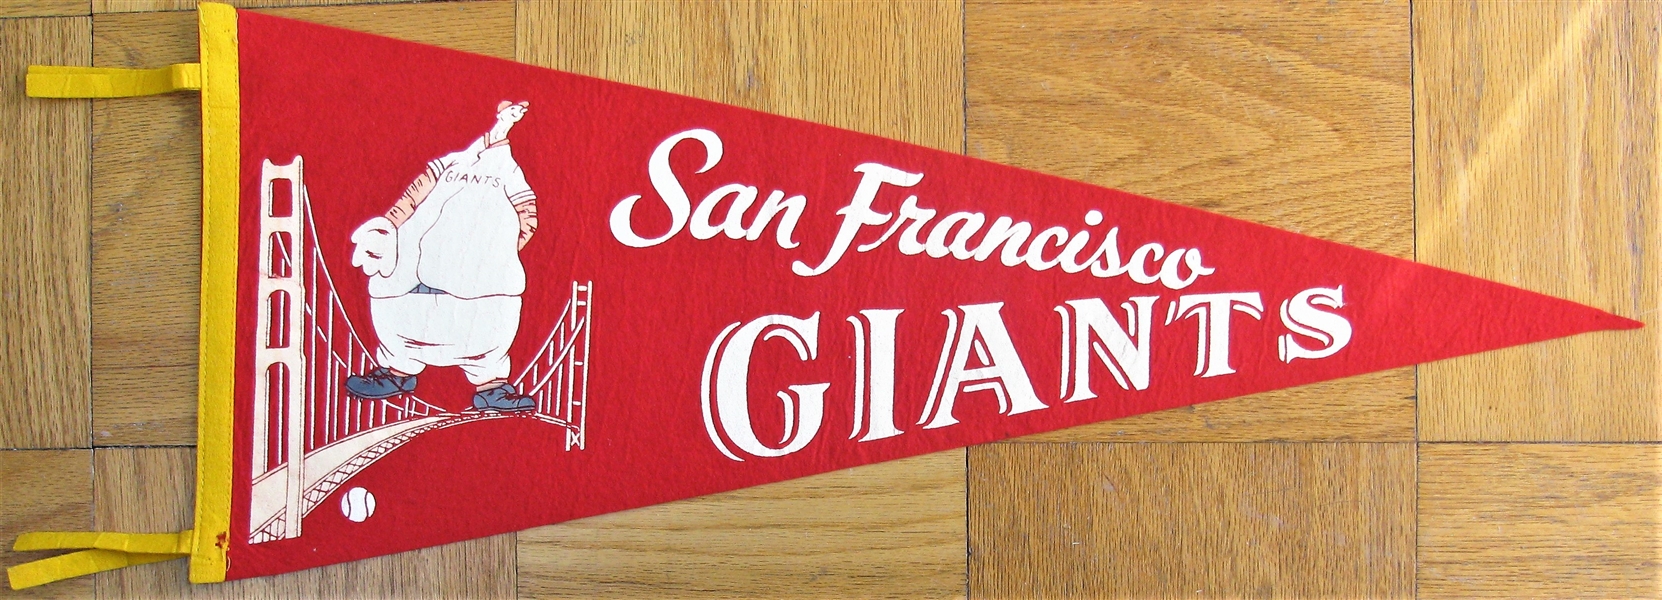 60's SAN FRANCISCO GIANTS (RED) PENNANT